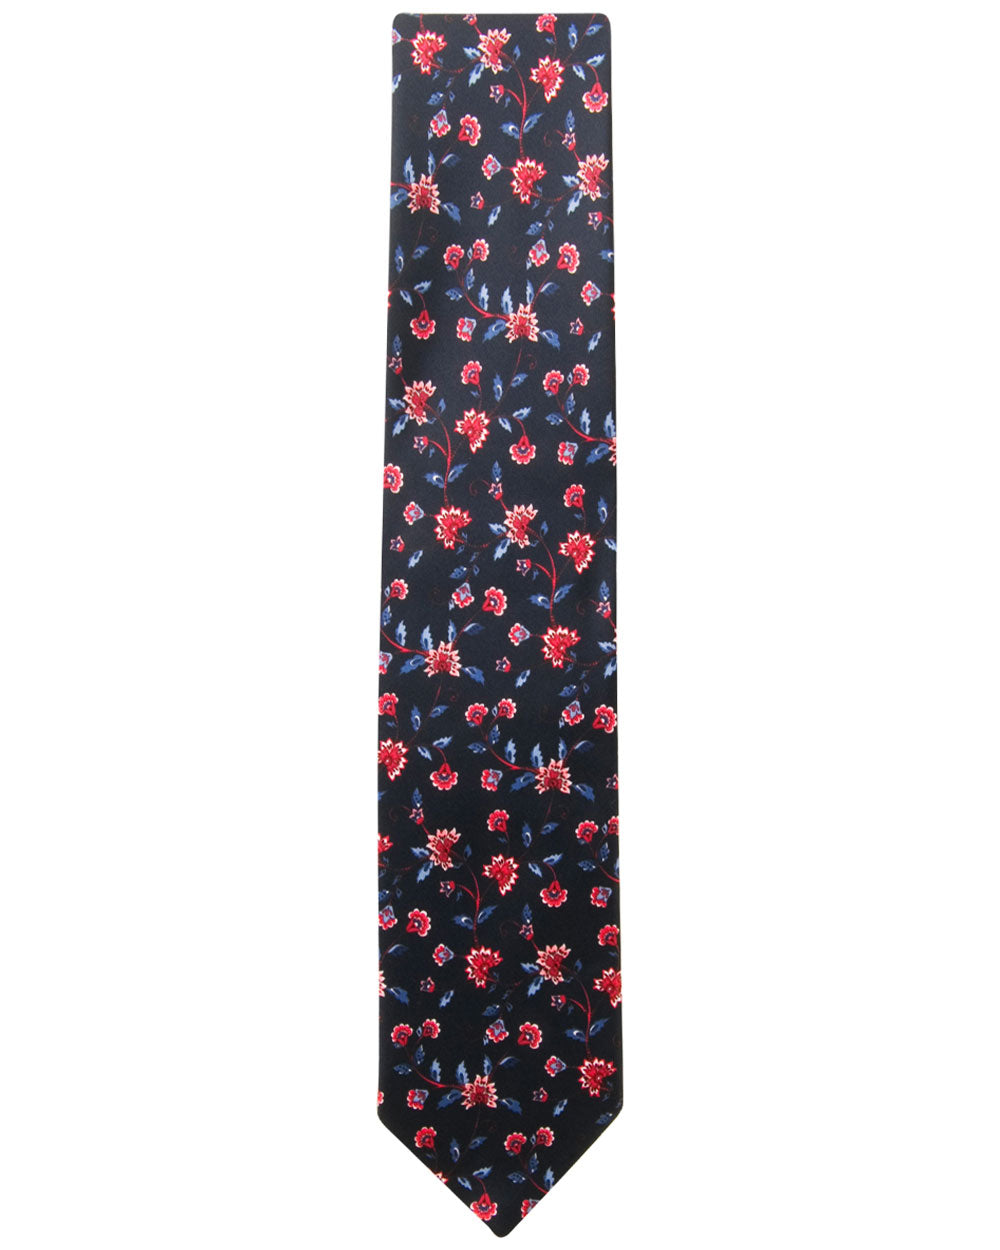 Black and Red Floral Tie